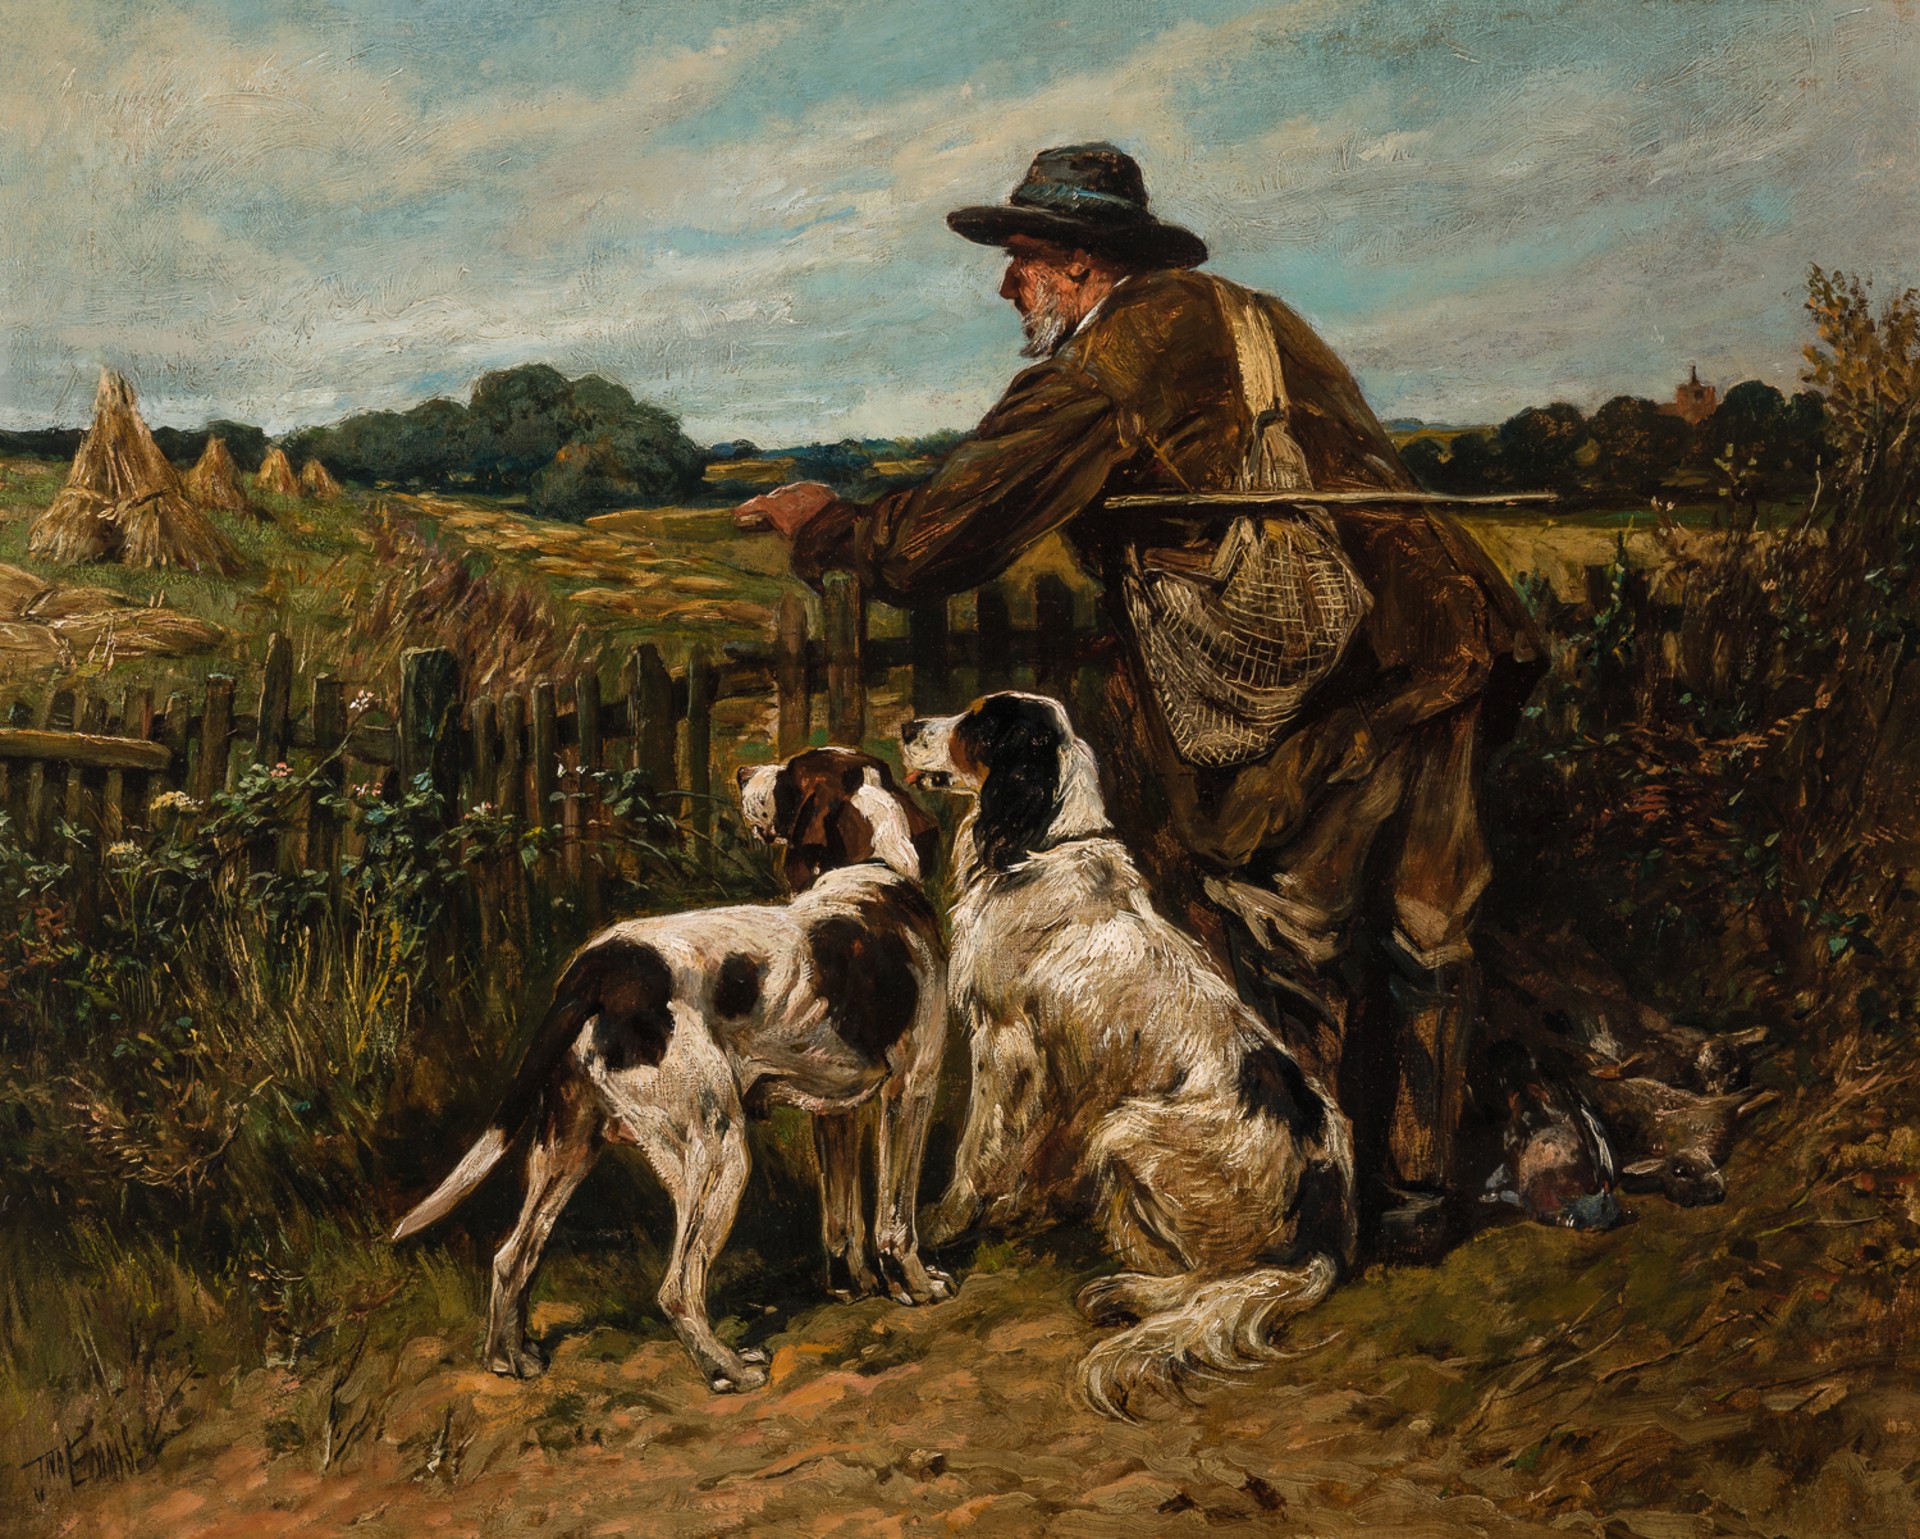 FORESTER WITH DOGS by John Emms